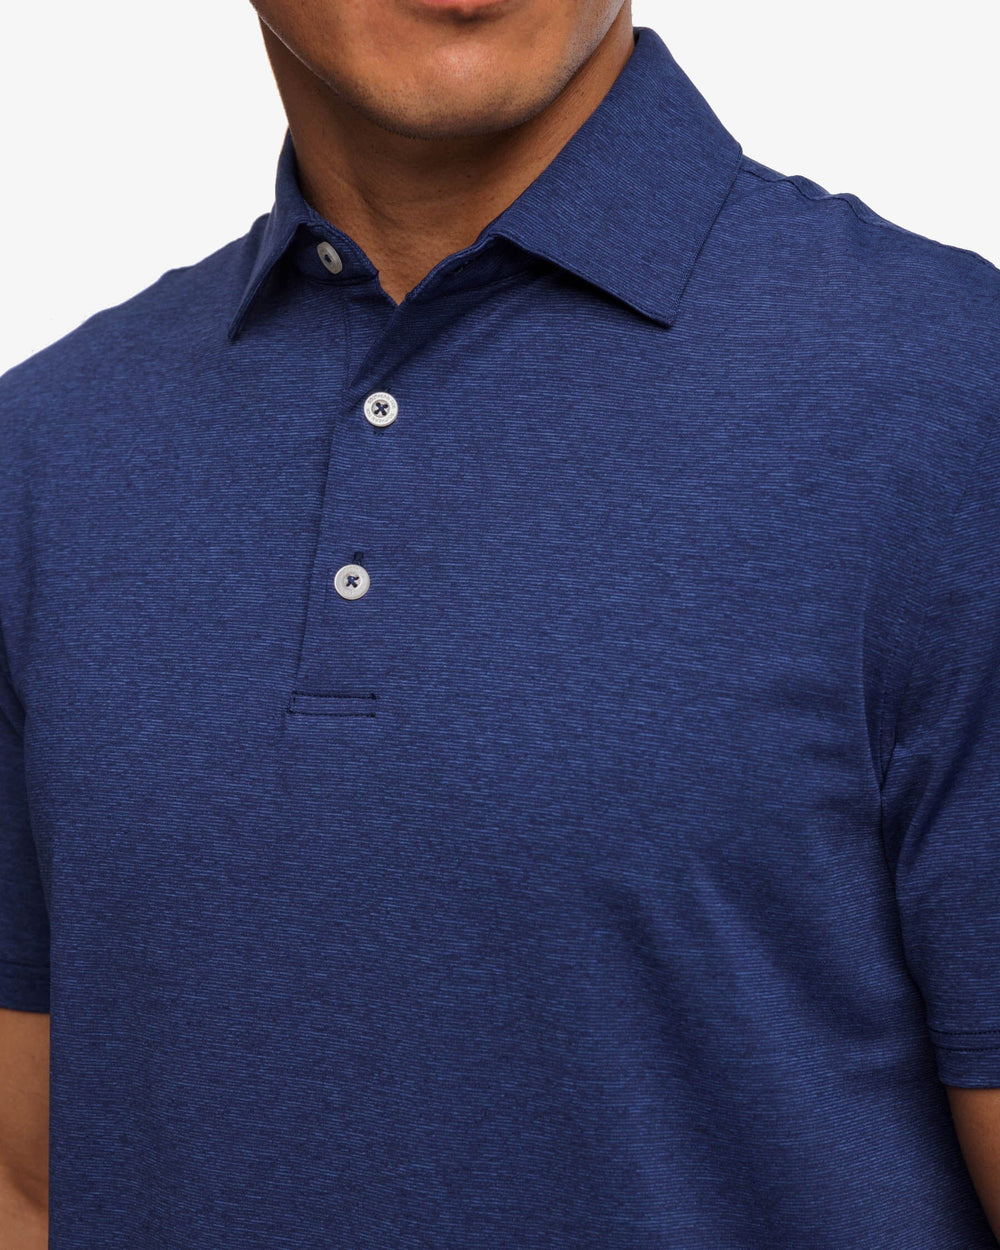 The detail view of the brrr°®-eeze Heather Performance Polo Shirt by Southern Tide - Heather Nautical Navy